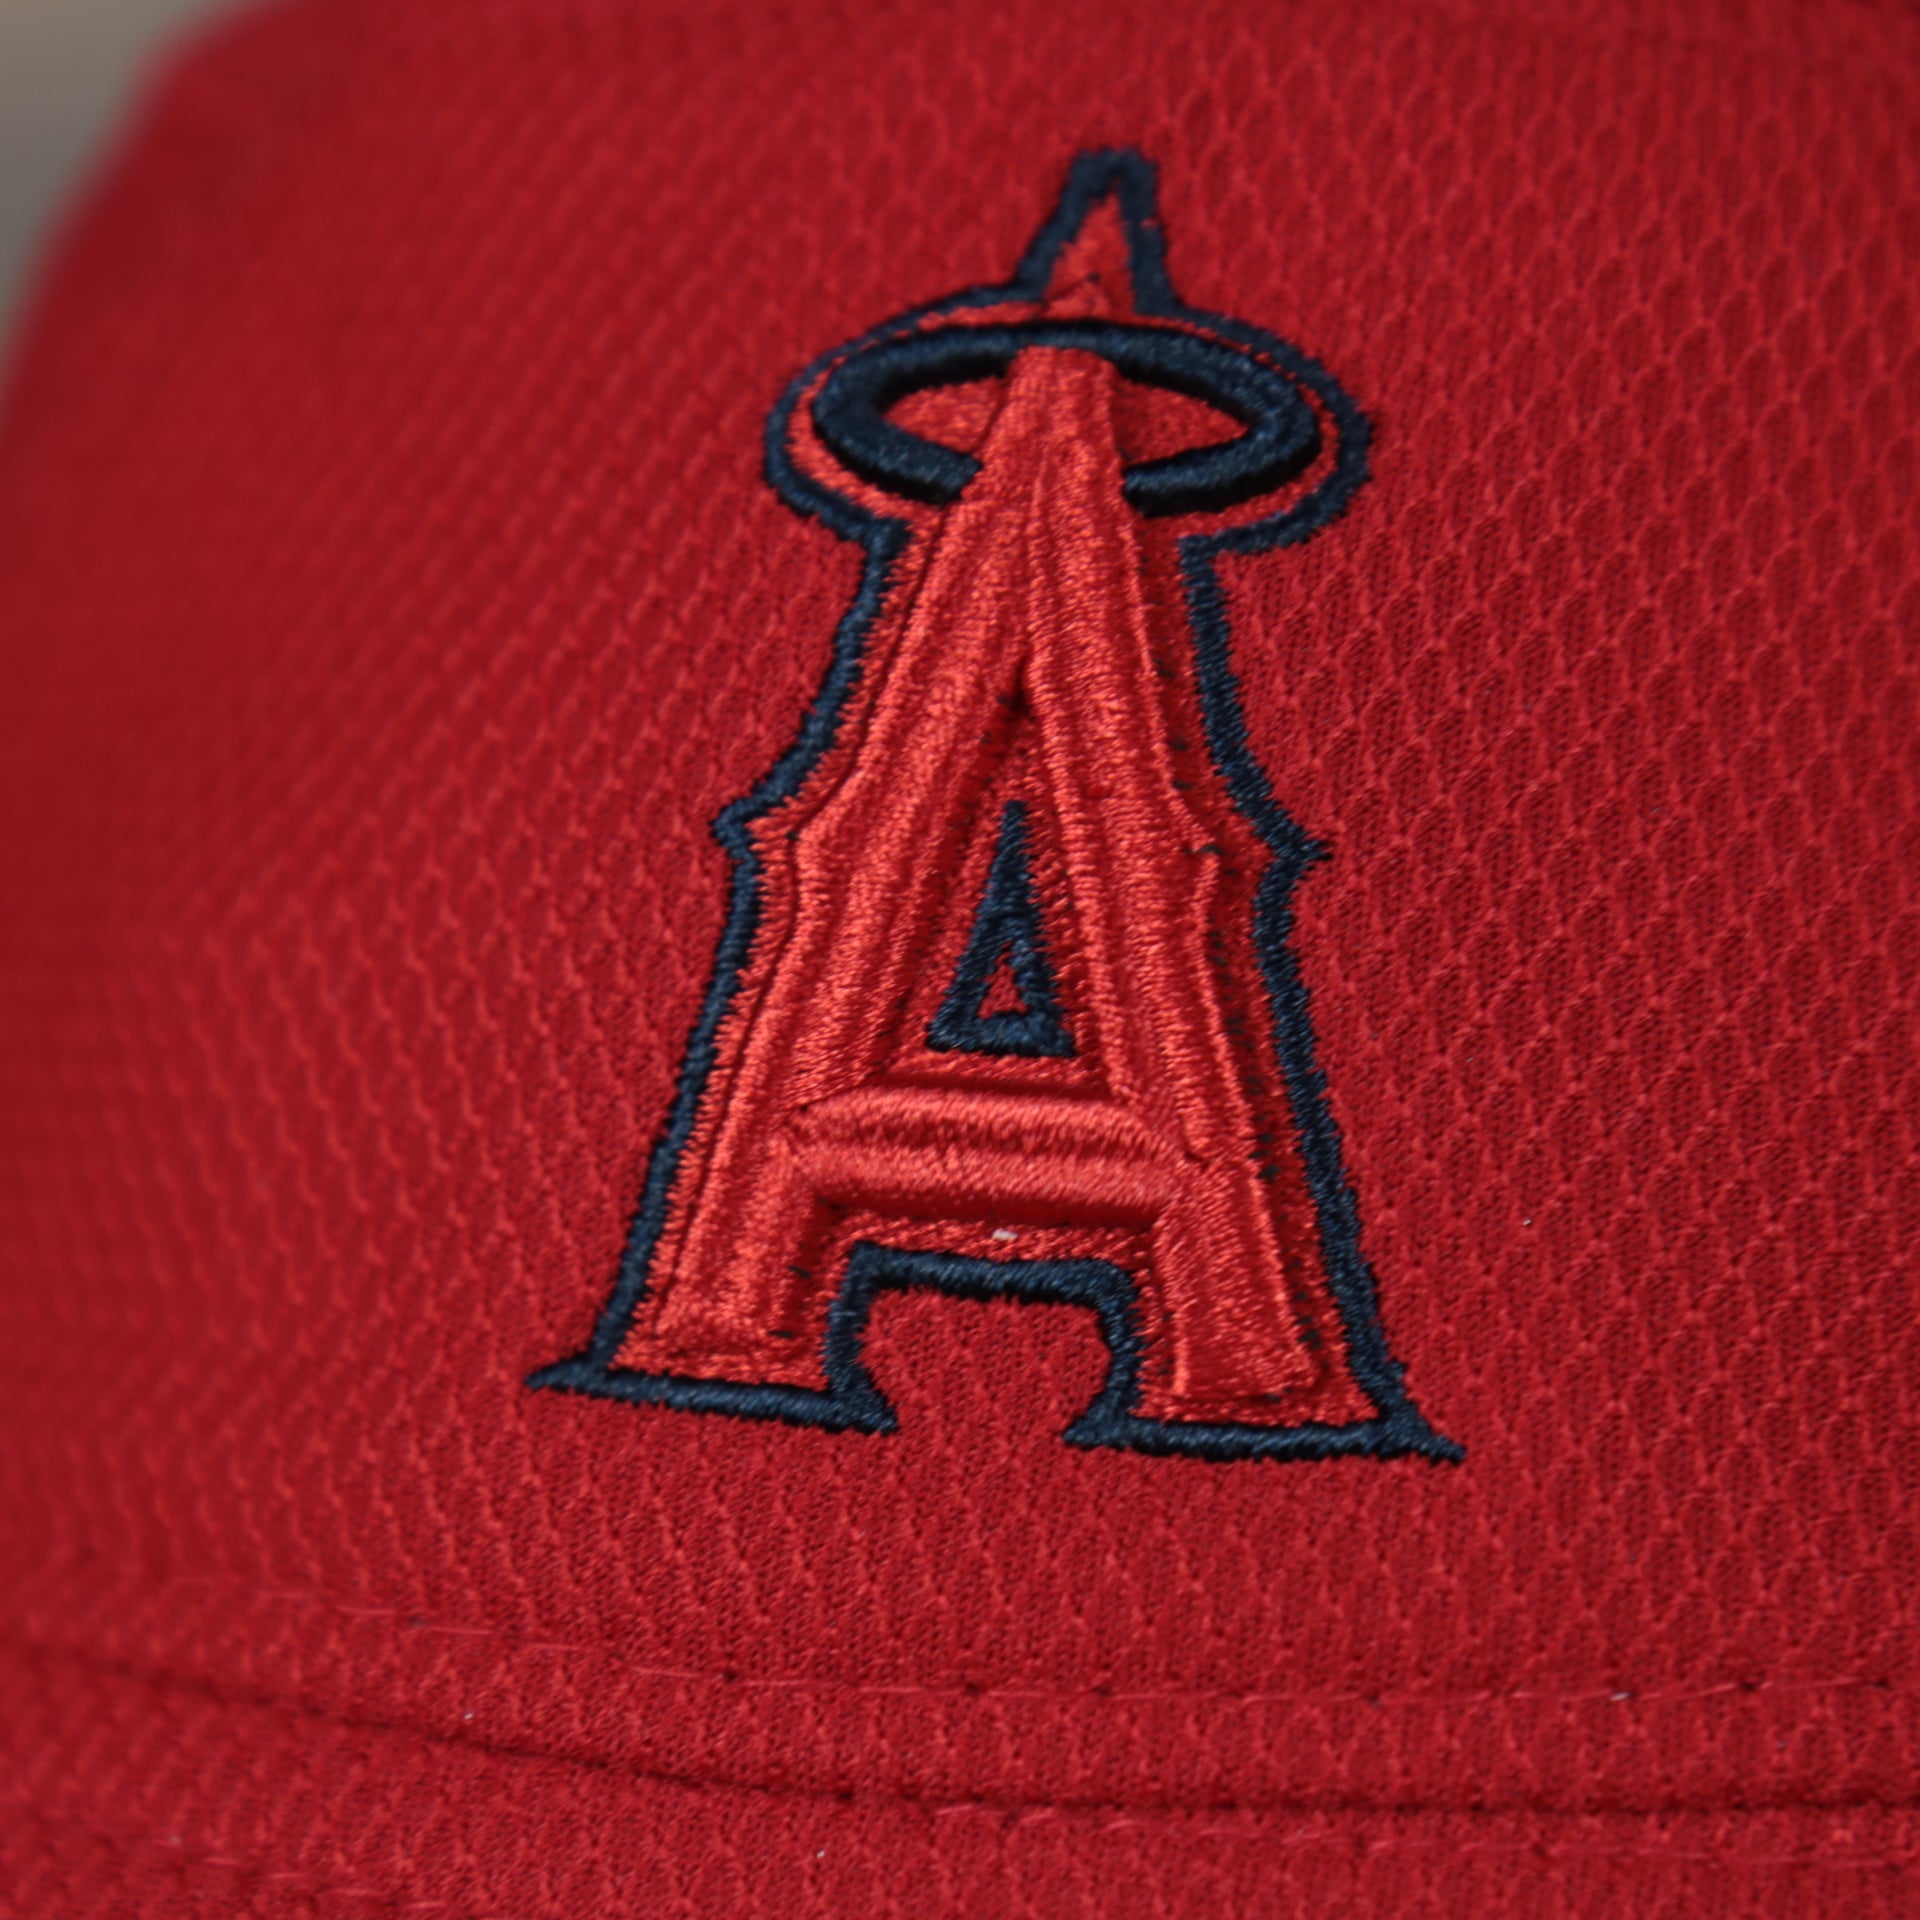 A close up of the Angles logo on the Anaheim Angels MLB 2022 Spring Training Onfield Bucket Hat